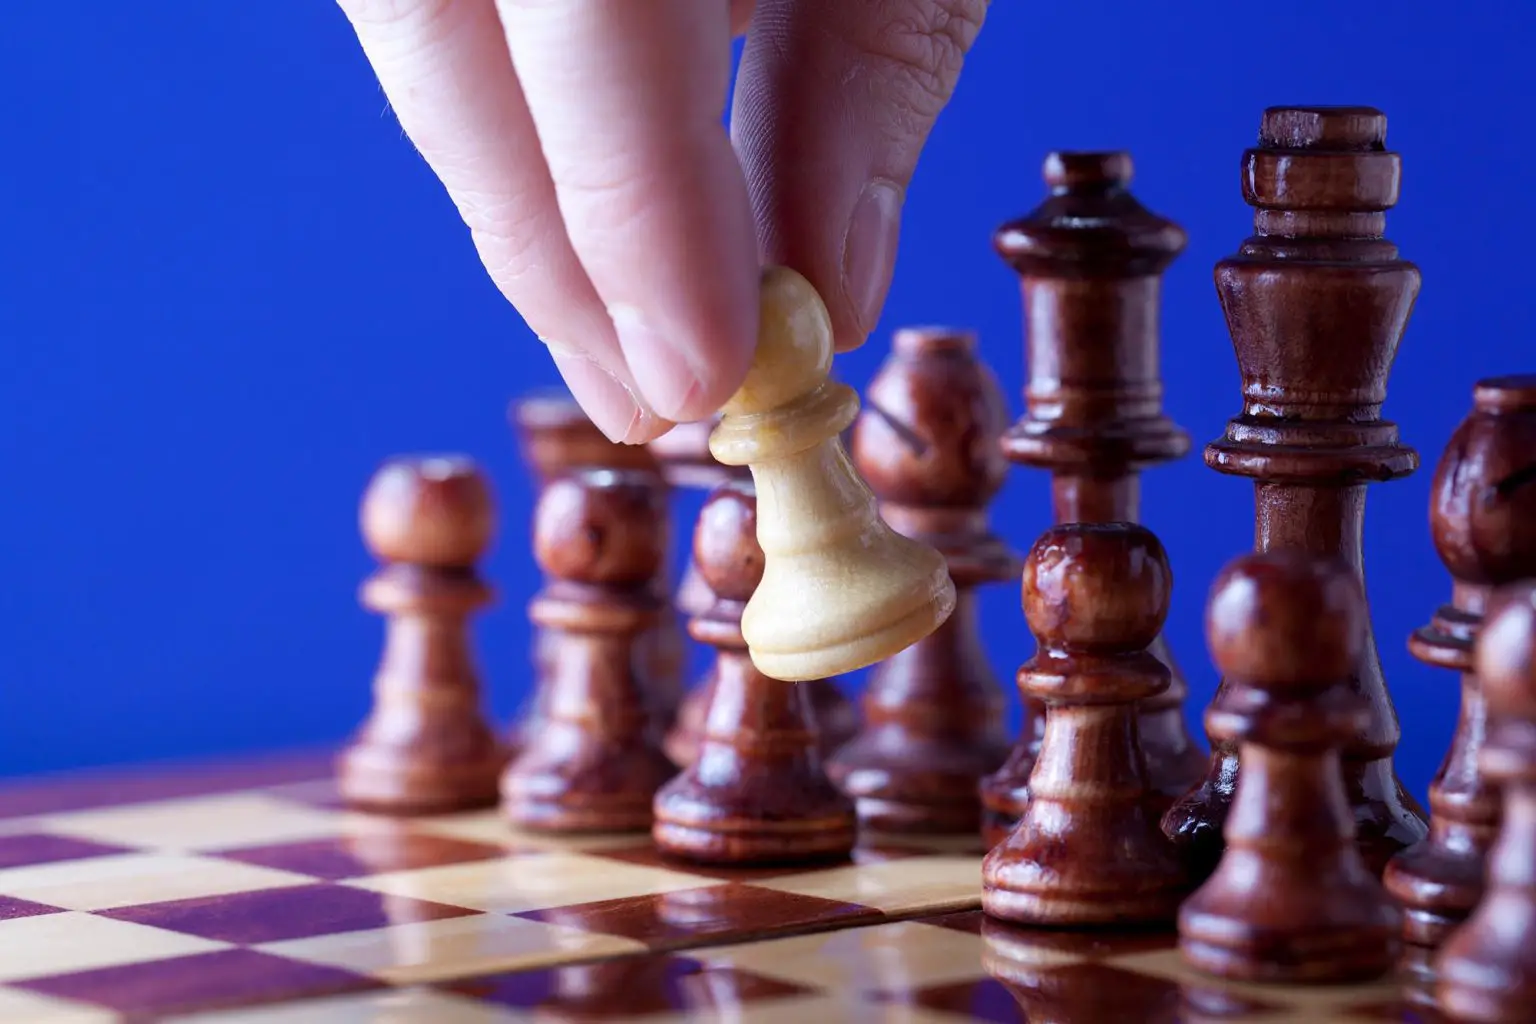 Nepo inches closer to world chess title after another draw